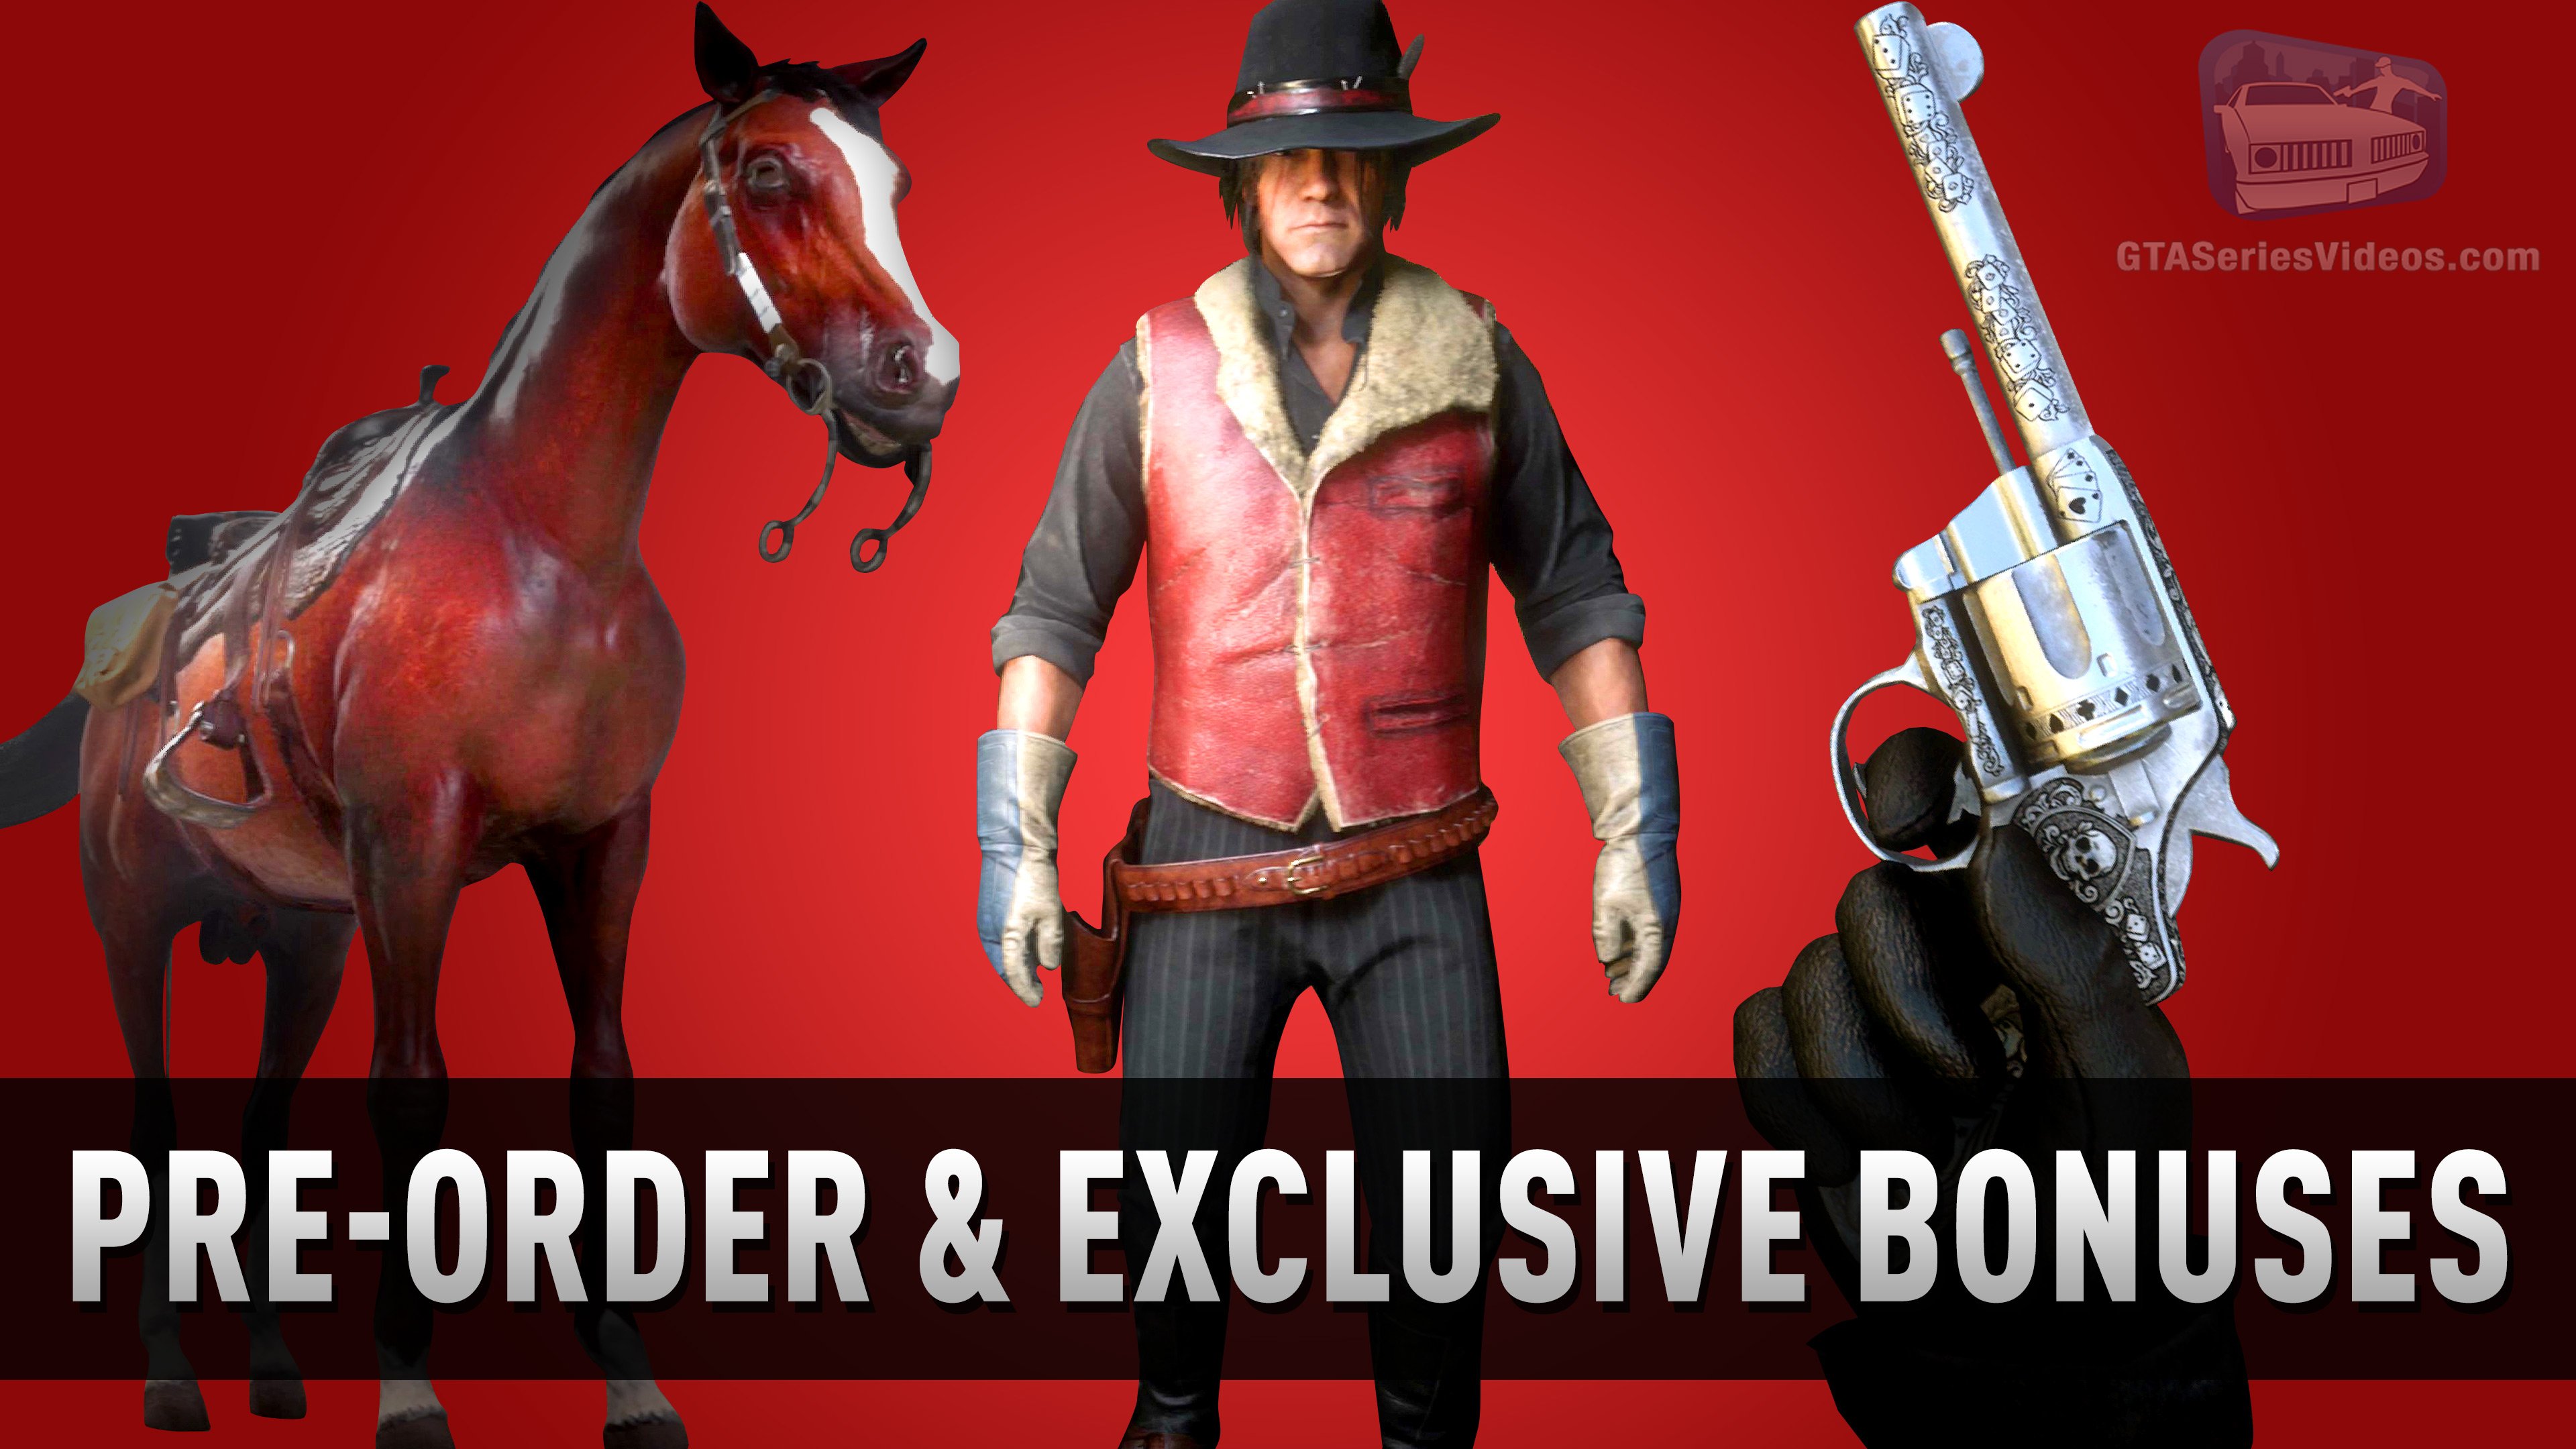 GTA Series on Twitter: exclusive pre-order bonuses, Special Edition, Ultimate Edition &amp; PSN Early Access content for Red Dead Online and Red Dead Redemption #RDR2 https://t.co/sKqWUGaI6f https://t.co/T4PGqJ5HG6" / Twitter